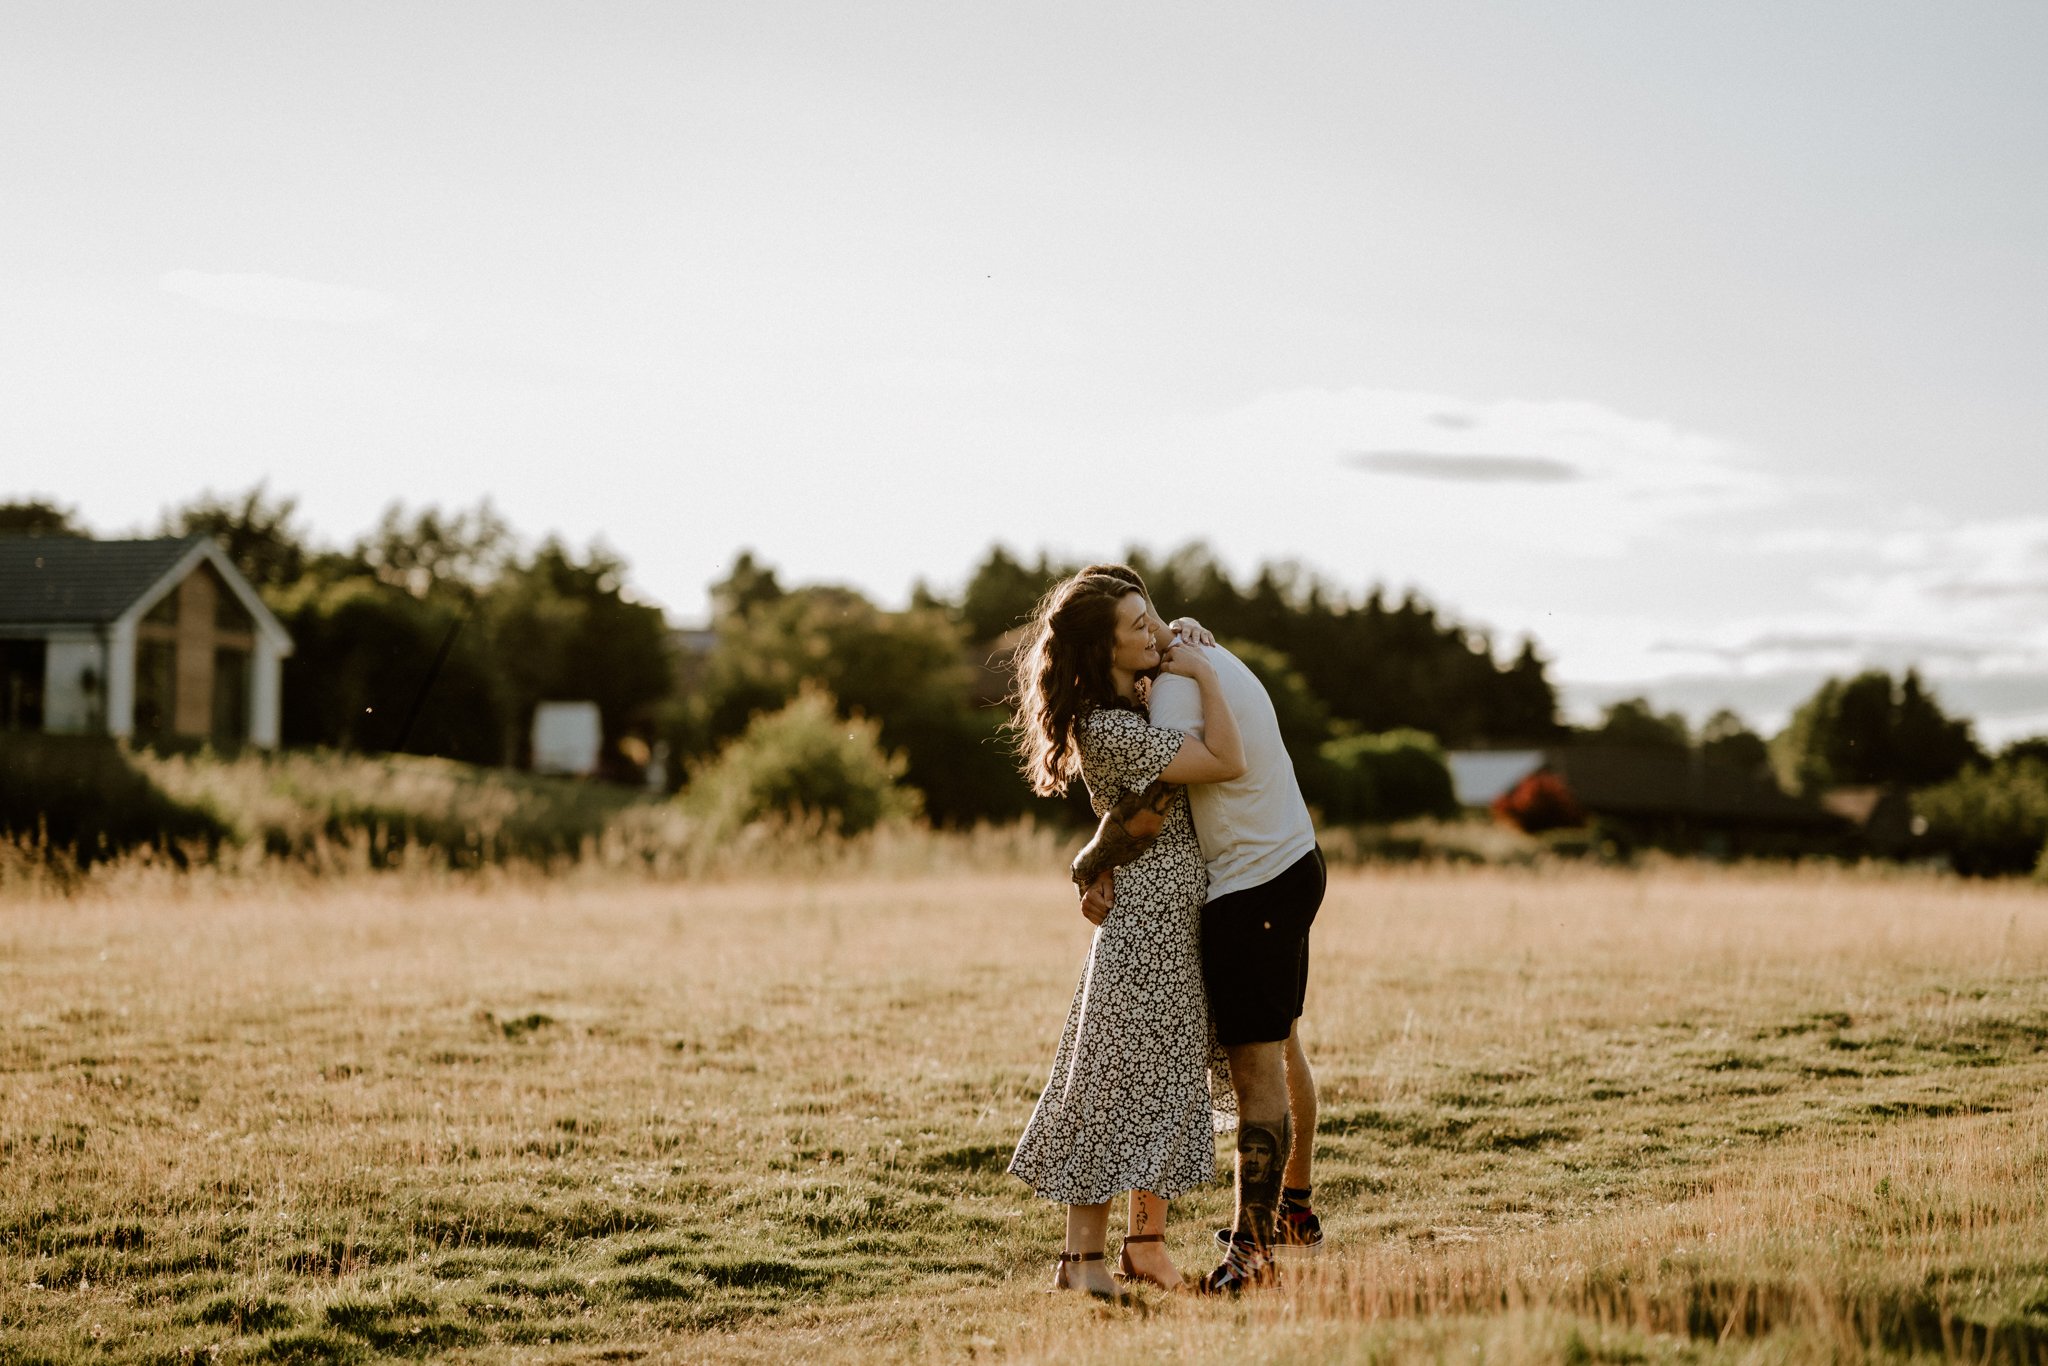 Angus Scotland Engagement and Wedding Photographer - Emily and Gabriel - Adventure Couple Session21.jpg